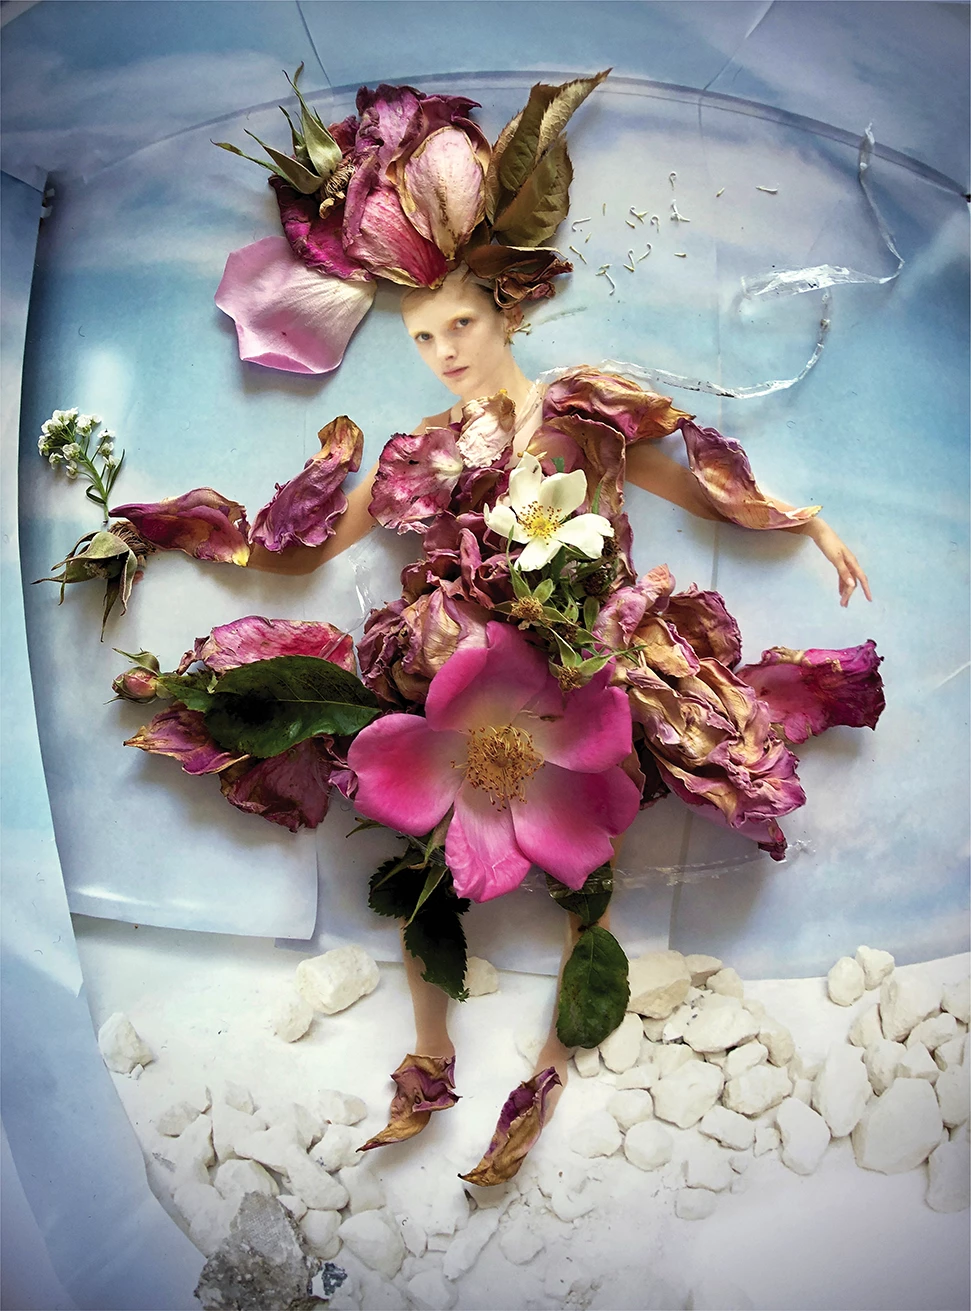 &Lt;Em&Gt;Wild And Cultivated: Fashioning The Rose&Lt;/Em&Gt; Celebrates Fashion’s Love Affair With Roses